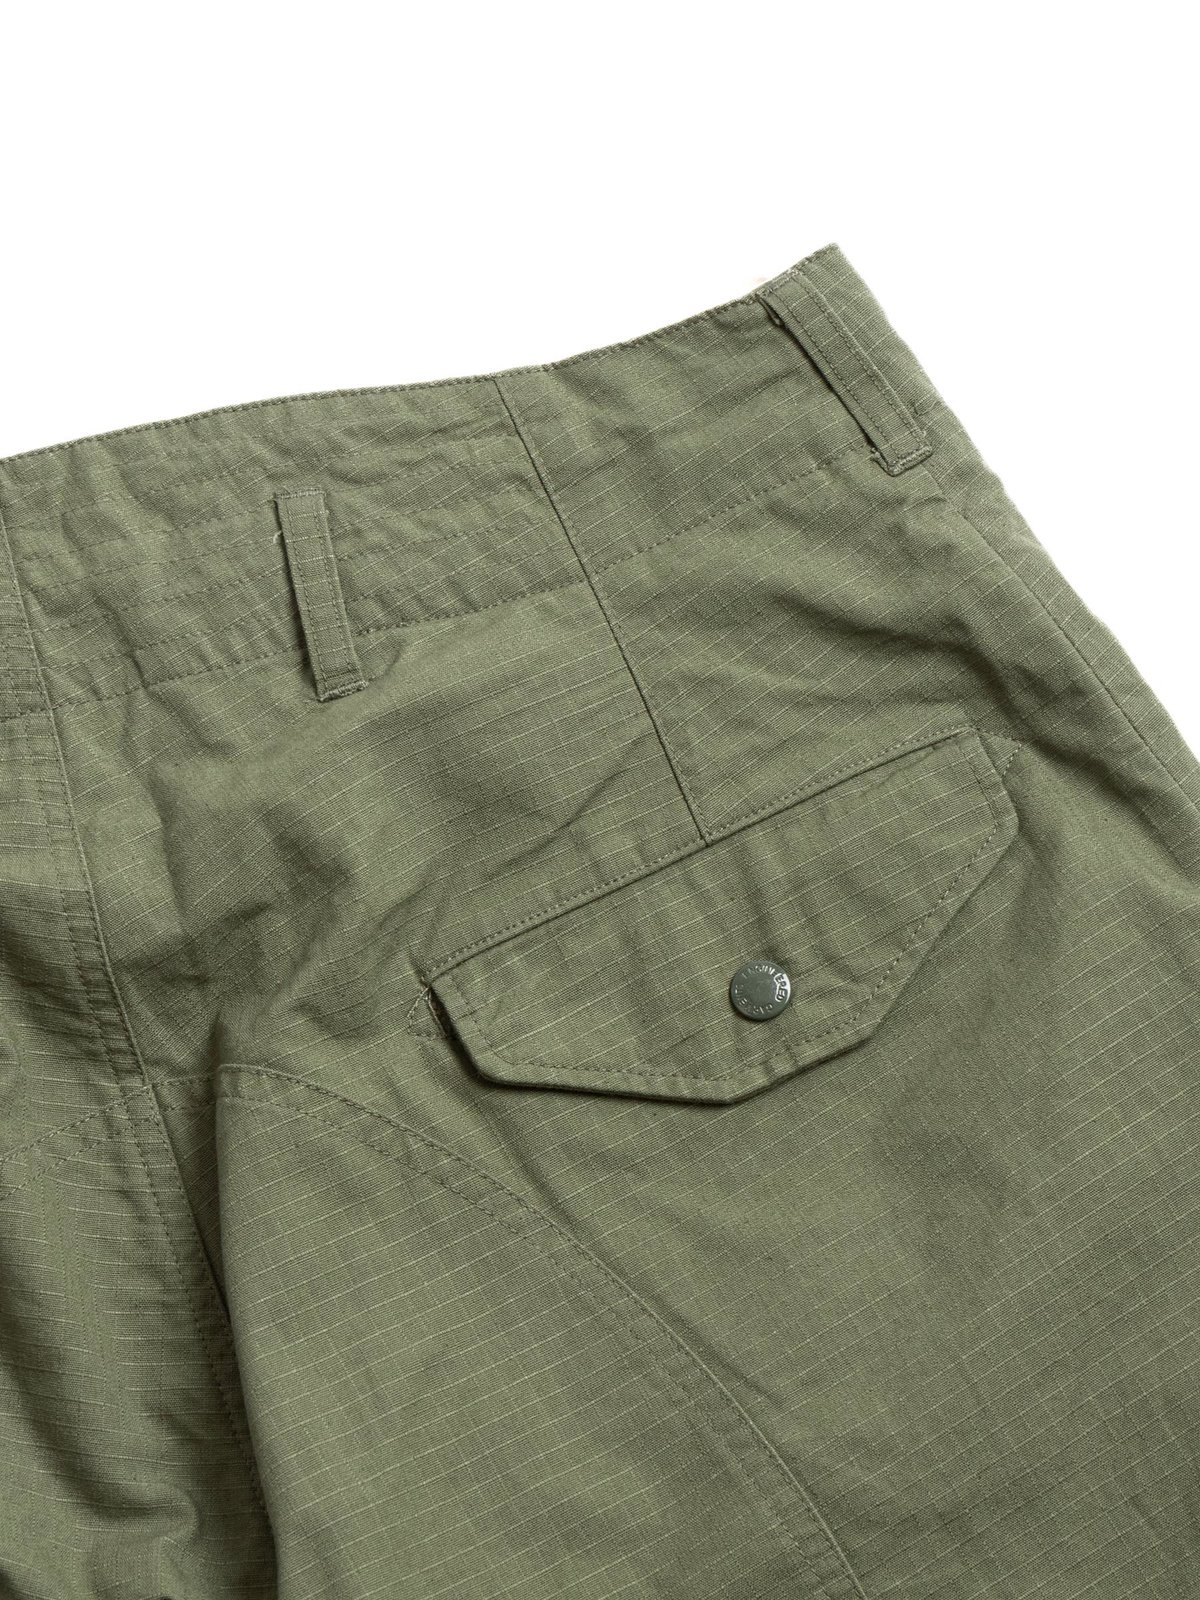 AIRBORNE PANT OLIVE COTTON RIPSTOP - Image 5